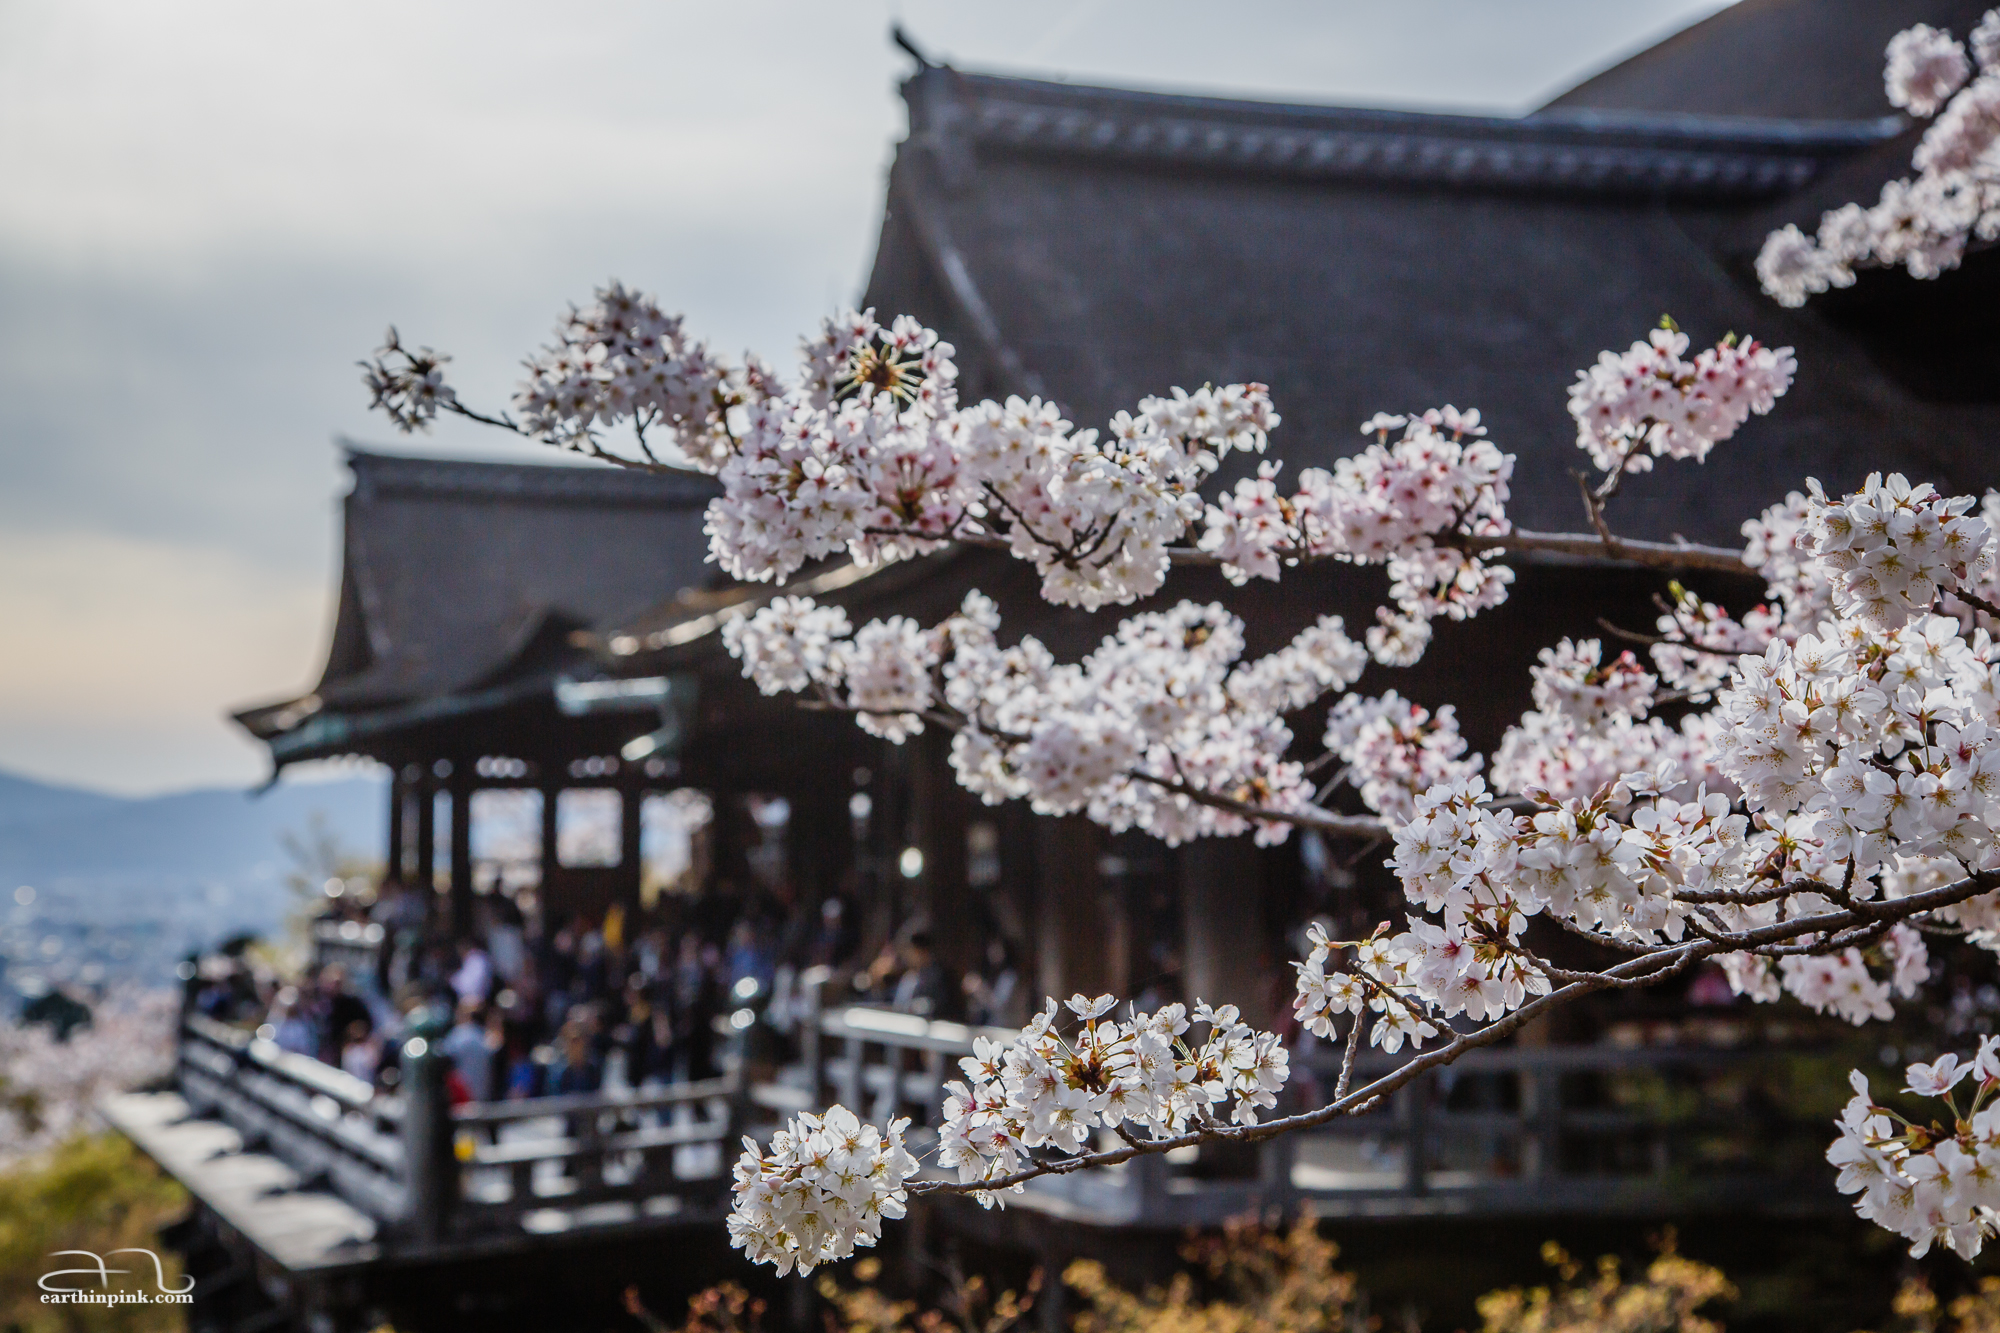 Branches of a cherry tree in front of the main building at Kiyomizu-dera.